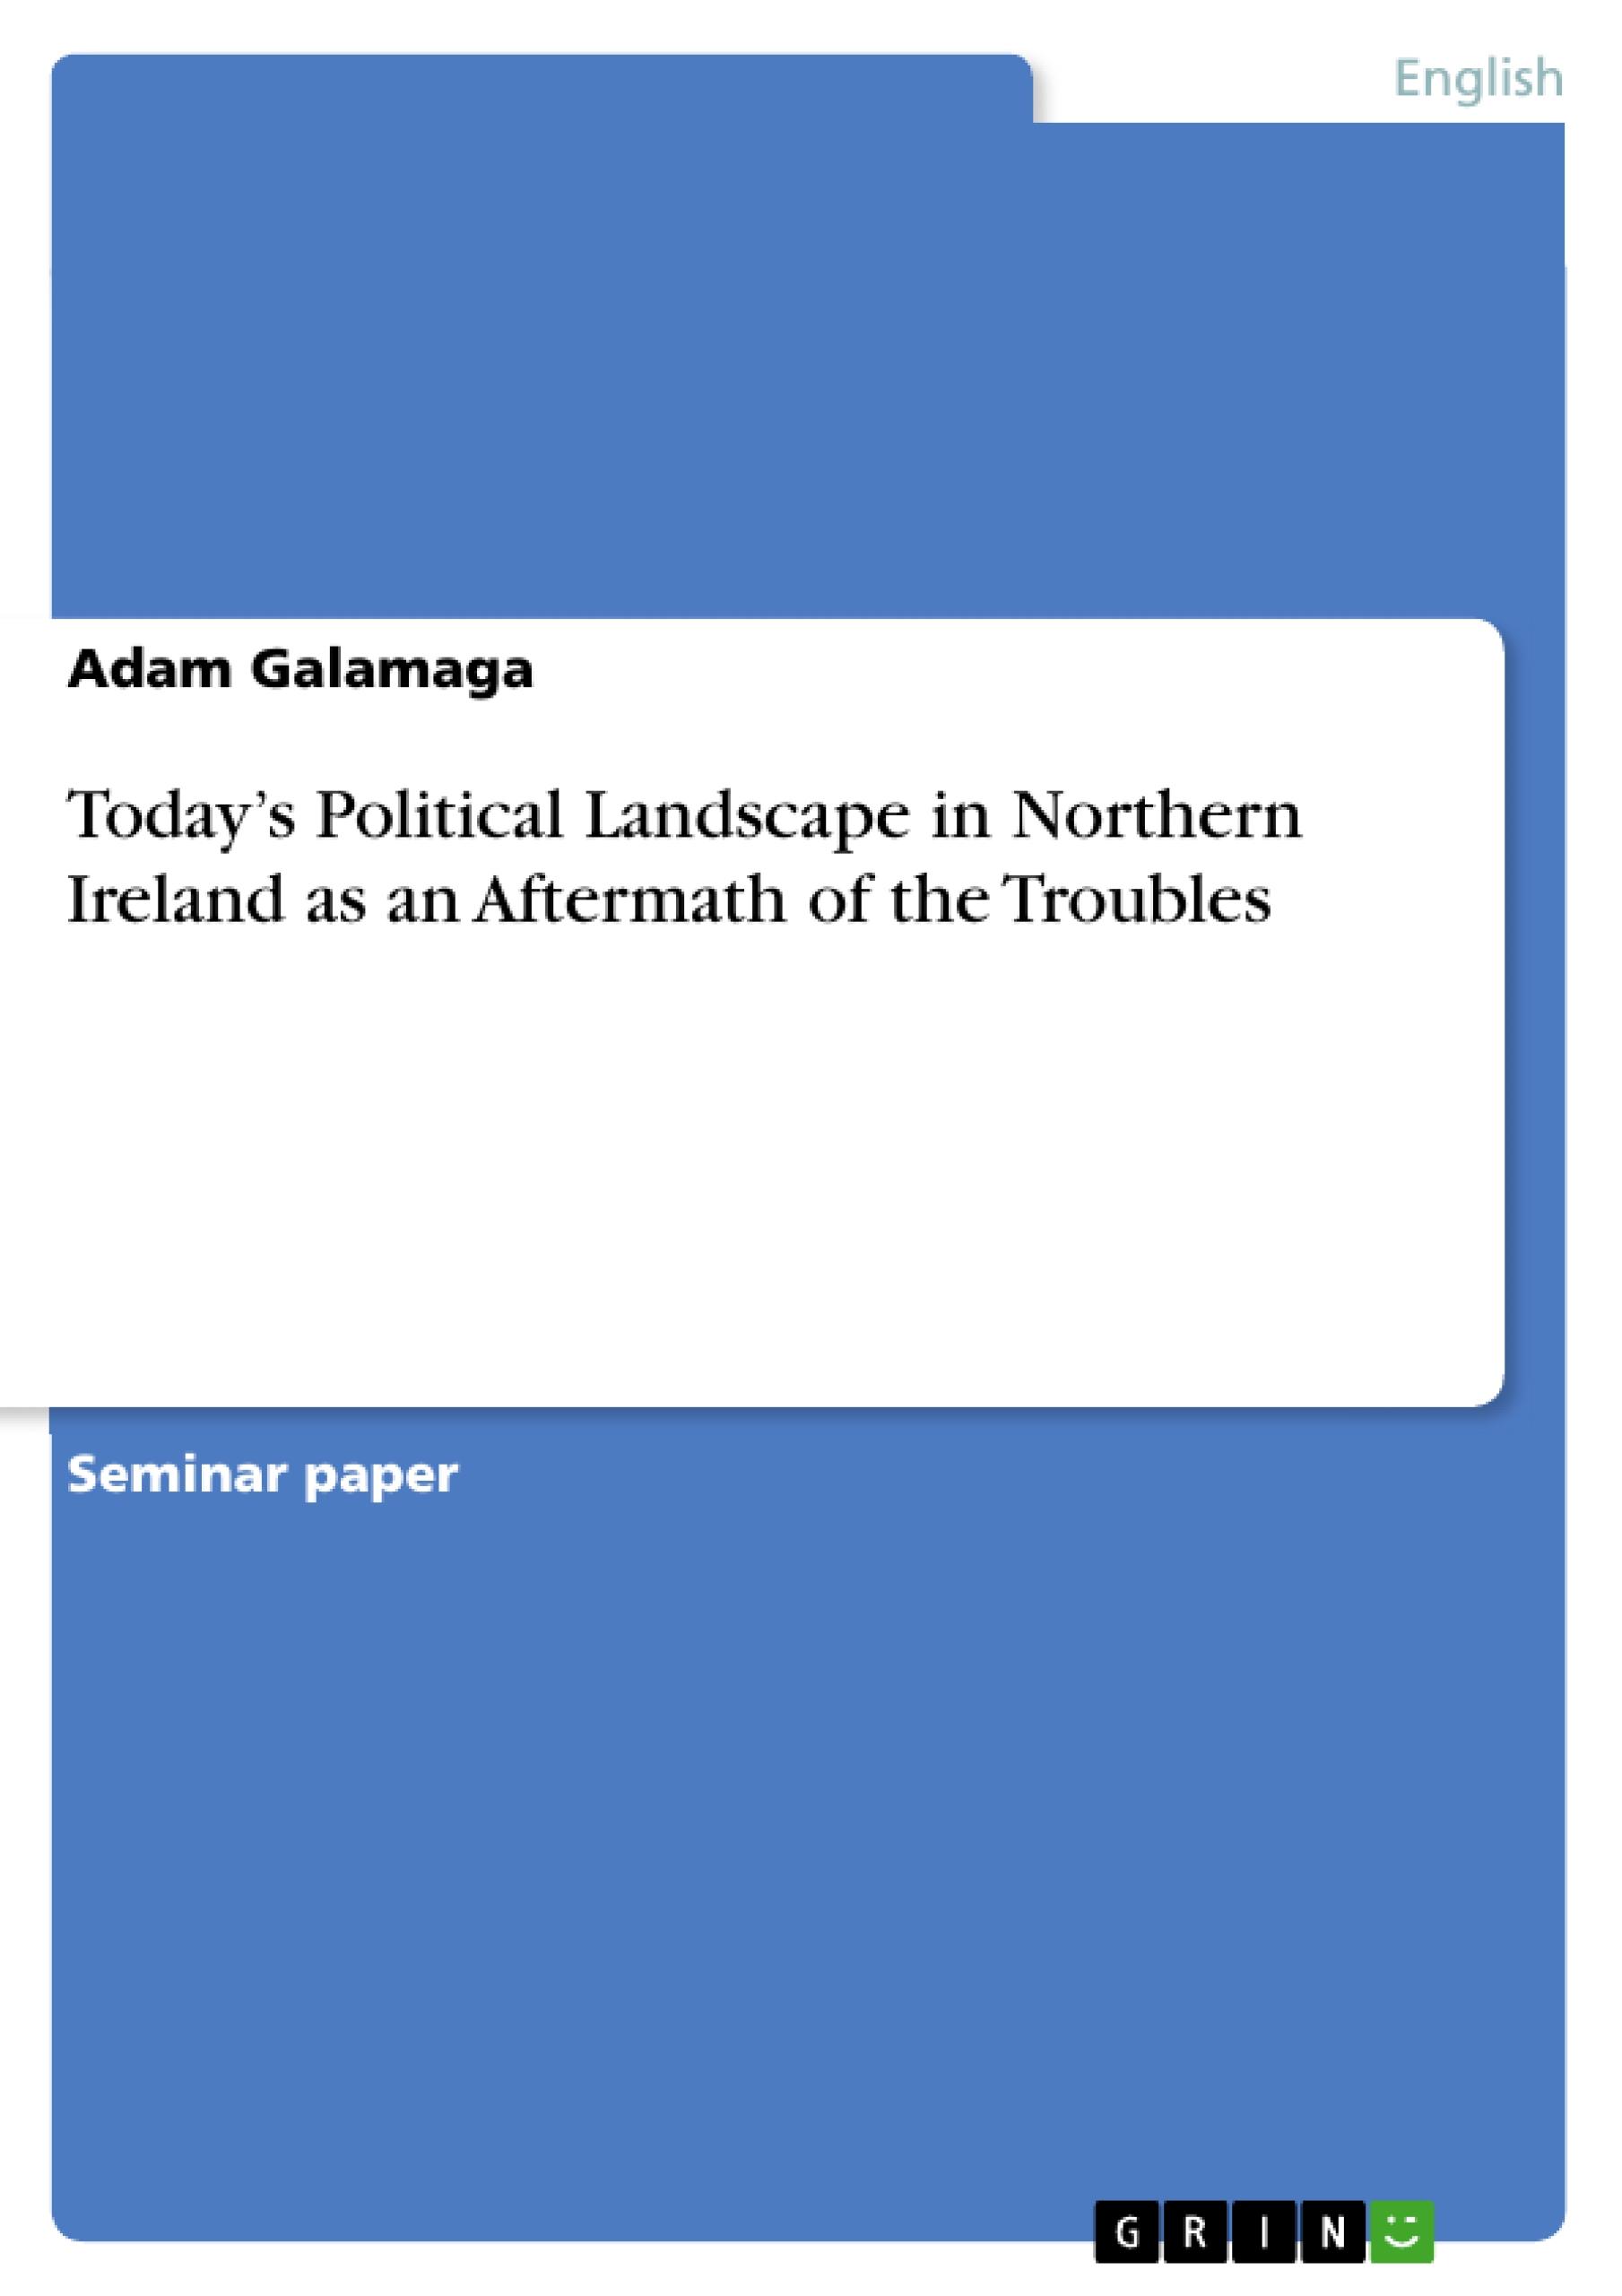 Today s Political Landscape in Northern Ireland as an Aftermath of the Troubles - Galamaga, Adam